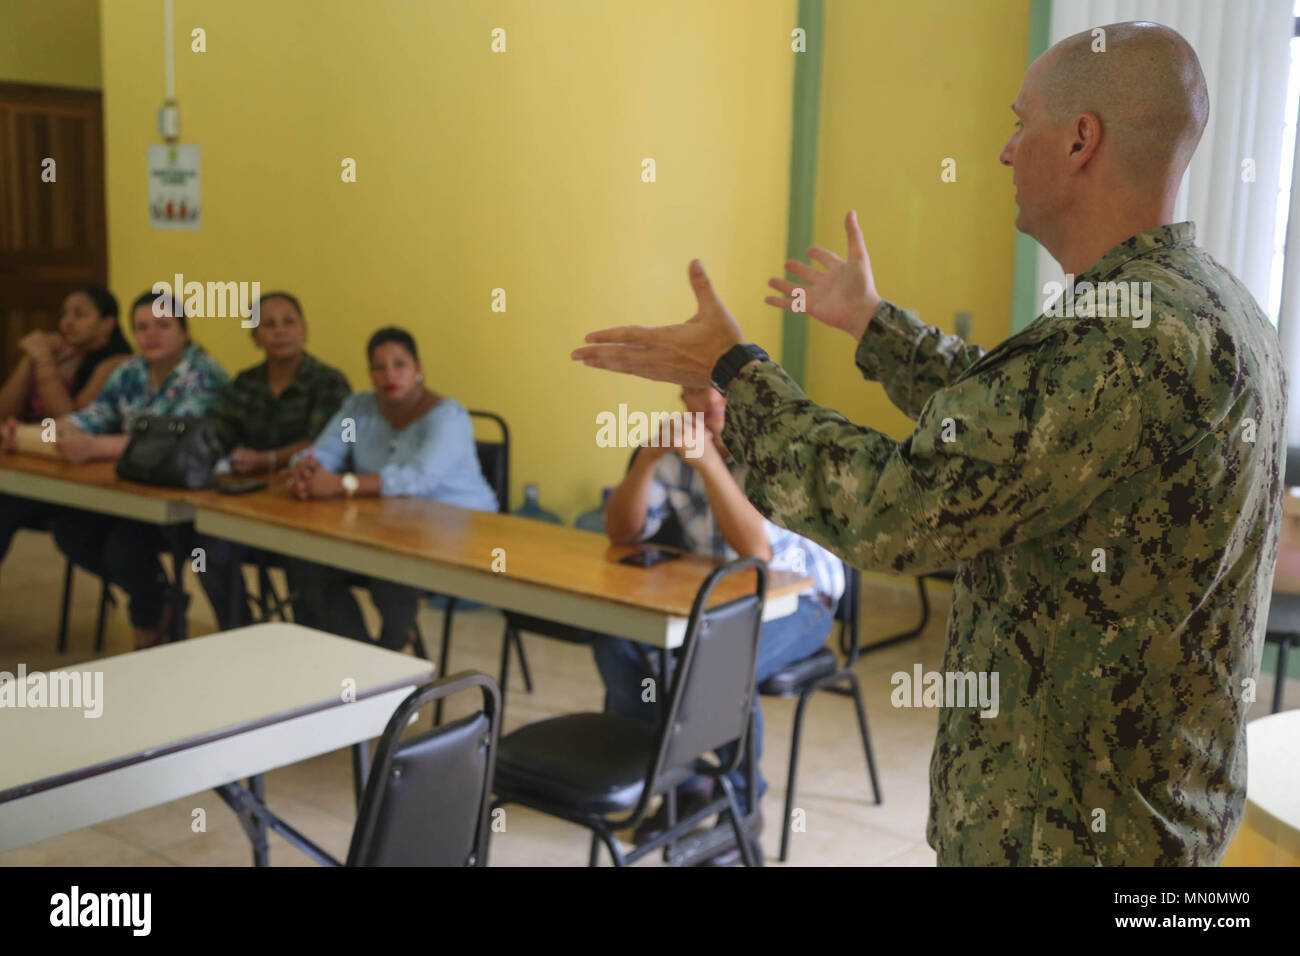 170807-A-QE286-0034 TRUJILLO, Honduras (Aug. 7, 2017) U.S. Navy Lt. Cmdr. Ian Sutherland, technical director for the Navy Entomology Center of Excellence, gives a entomology presentation at a local medical center, during a subject matter expert exchange, as part of Southern Partnership Station 17. SPS-EPF 17 is a U.S. Navy deployment, executed by U.S. Naval Forces Southern Command/U.S. 4th Fleet, focused on subject matter expert exchanges with partner nation militaries and security forces in Central and South America. (U.S. Army photo by SPC Judge Jones/Released) Stock Photo